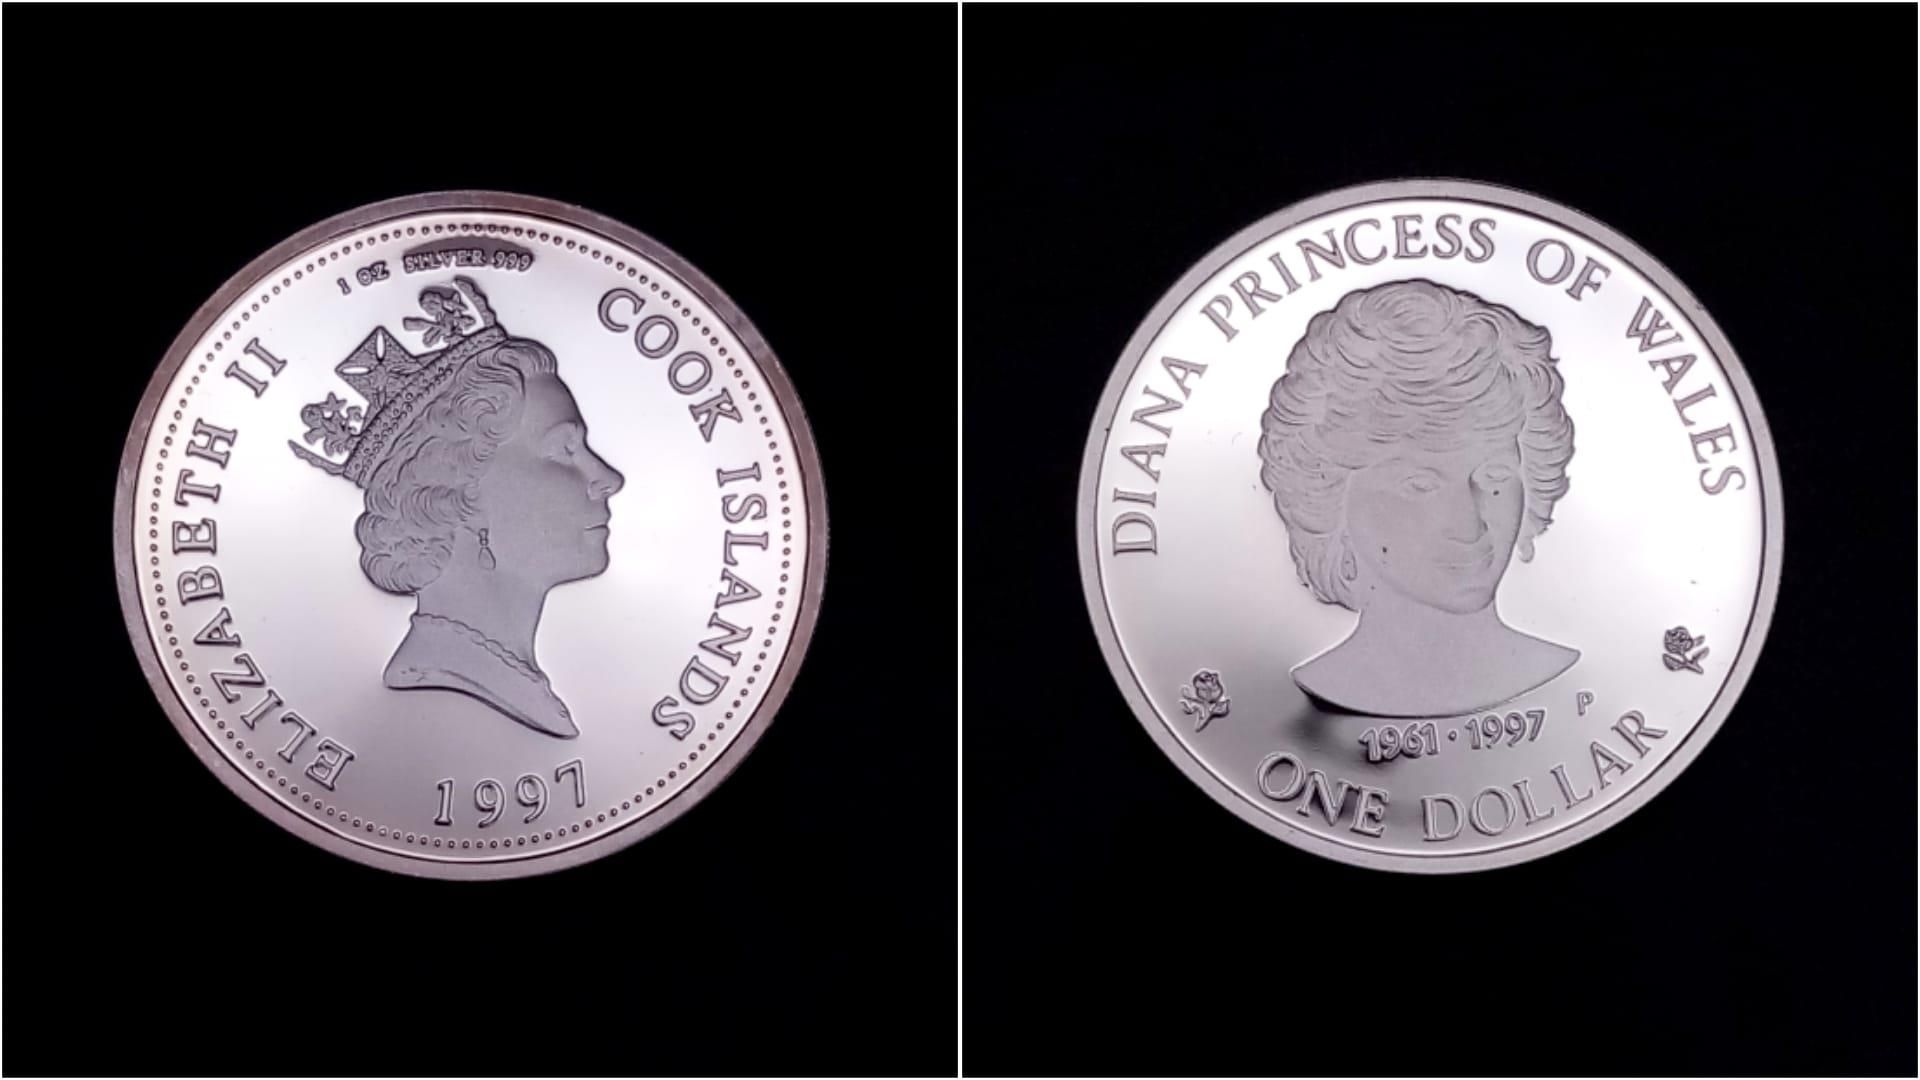 A 999 Silver Cook Islands Proof One Dollar Coin - Commemorating the death of Princess Diana. Comes